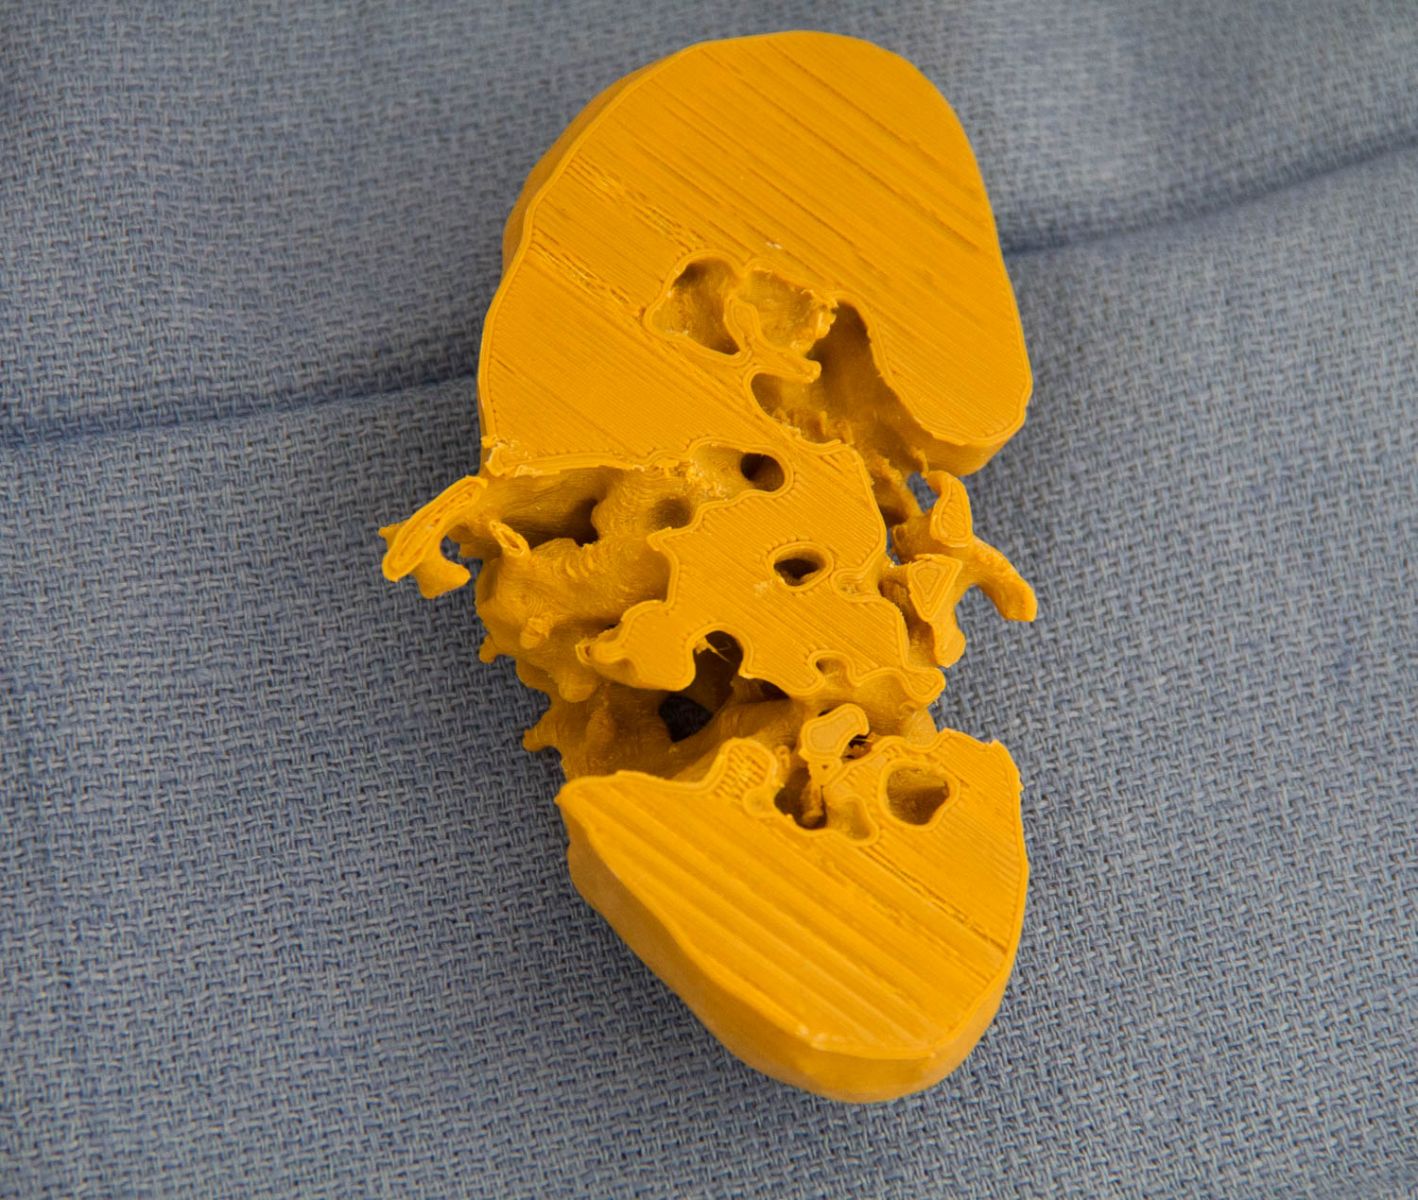 3D printed renal mass section